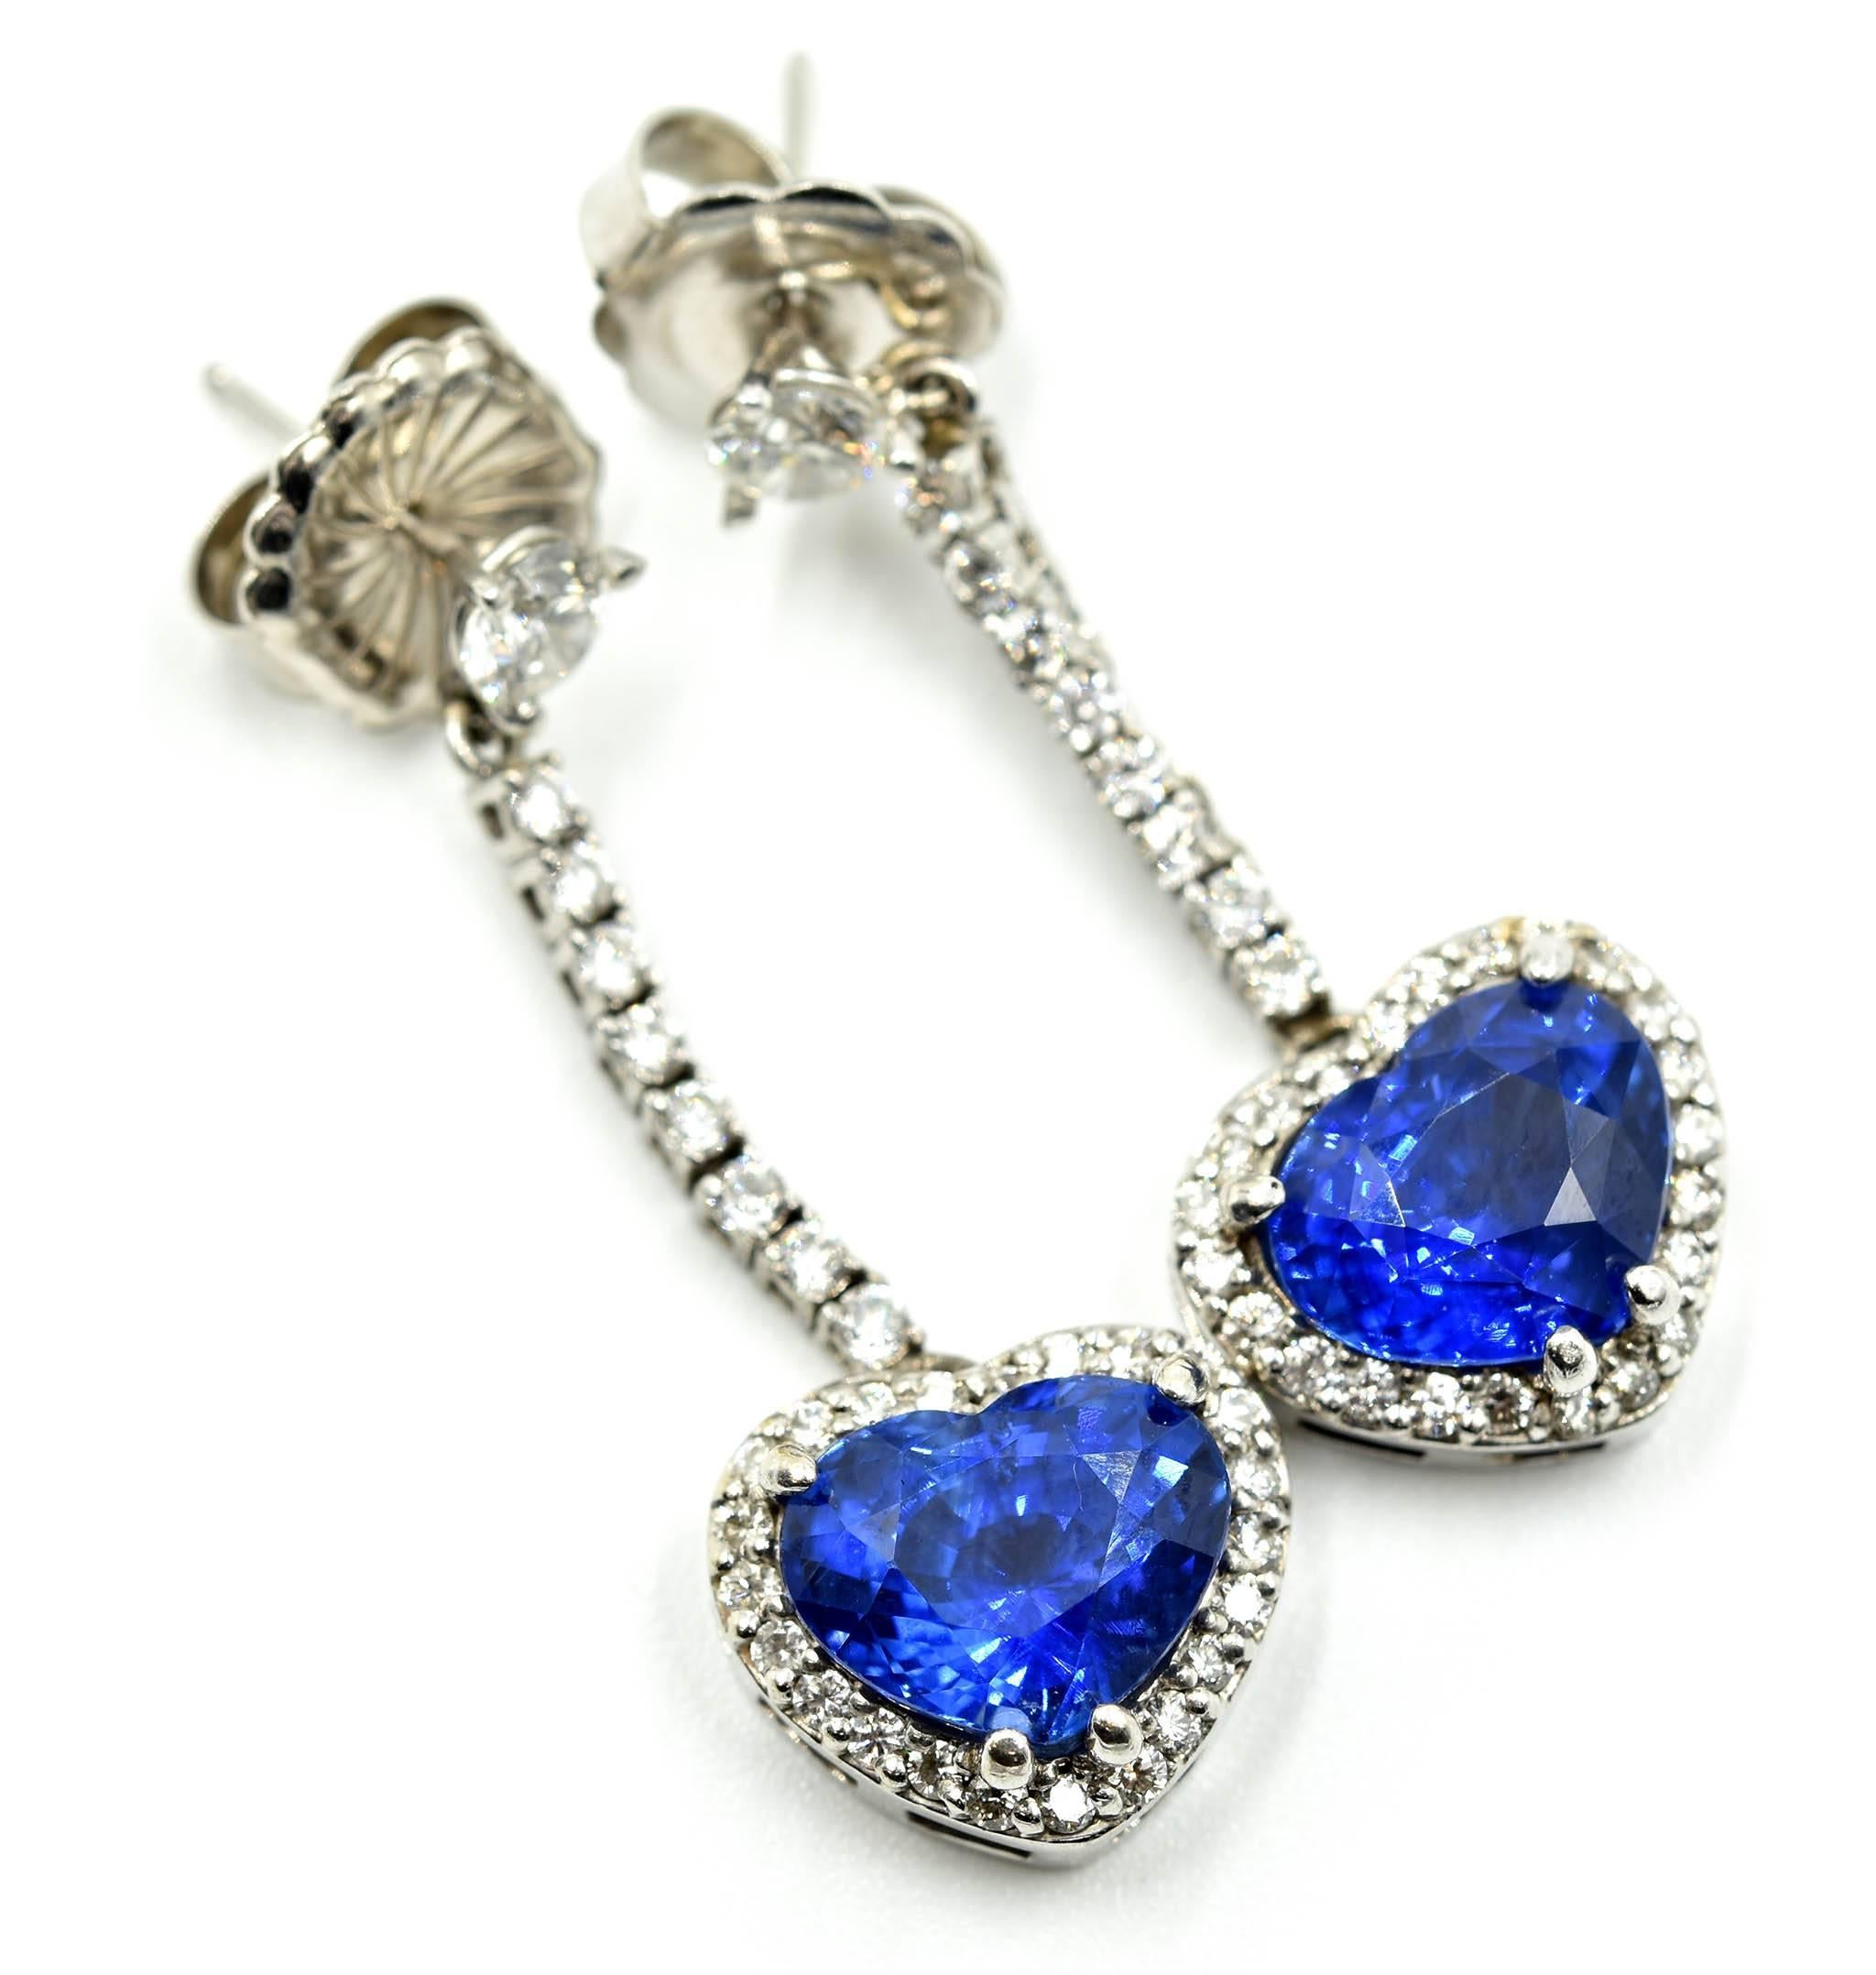 These stunning earrings feature GIA-certified heart-cut sapphires. The sapphires have a combined weight of 7.13 carats. The diamonds have an additional weight of 1.30 carats, and the stones are graded G in color and VS in clarity. Each earring